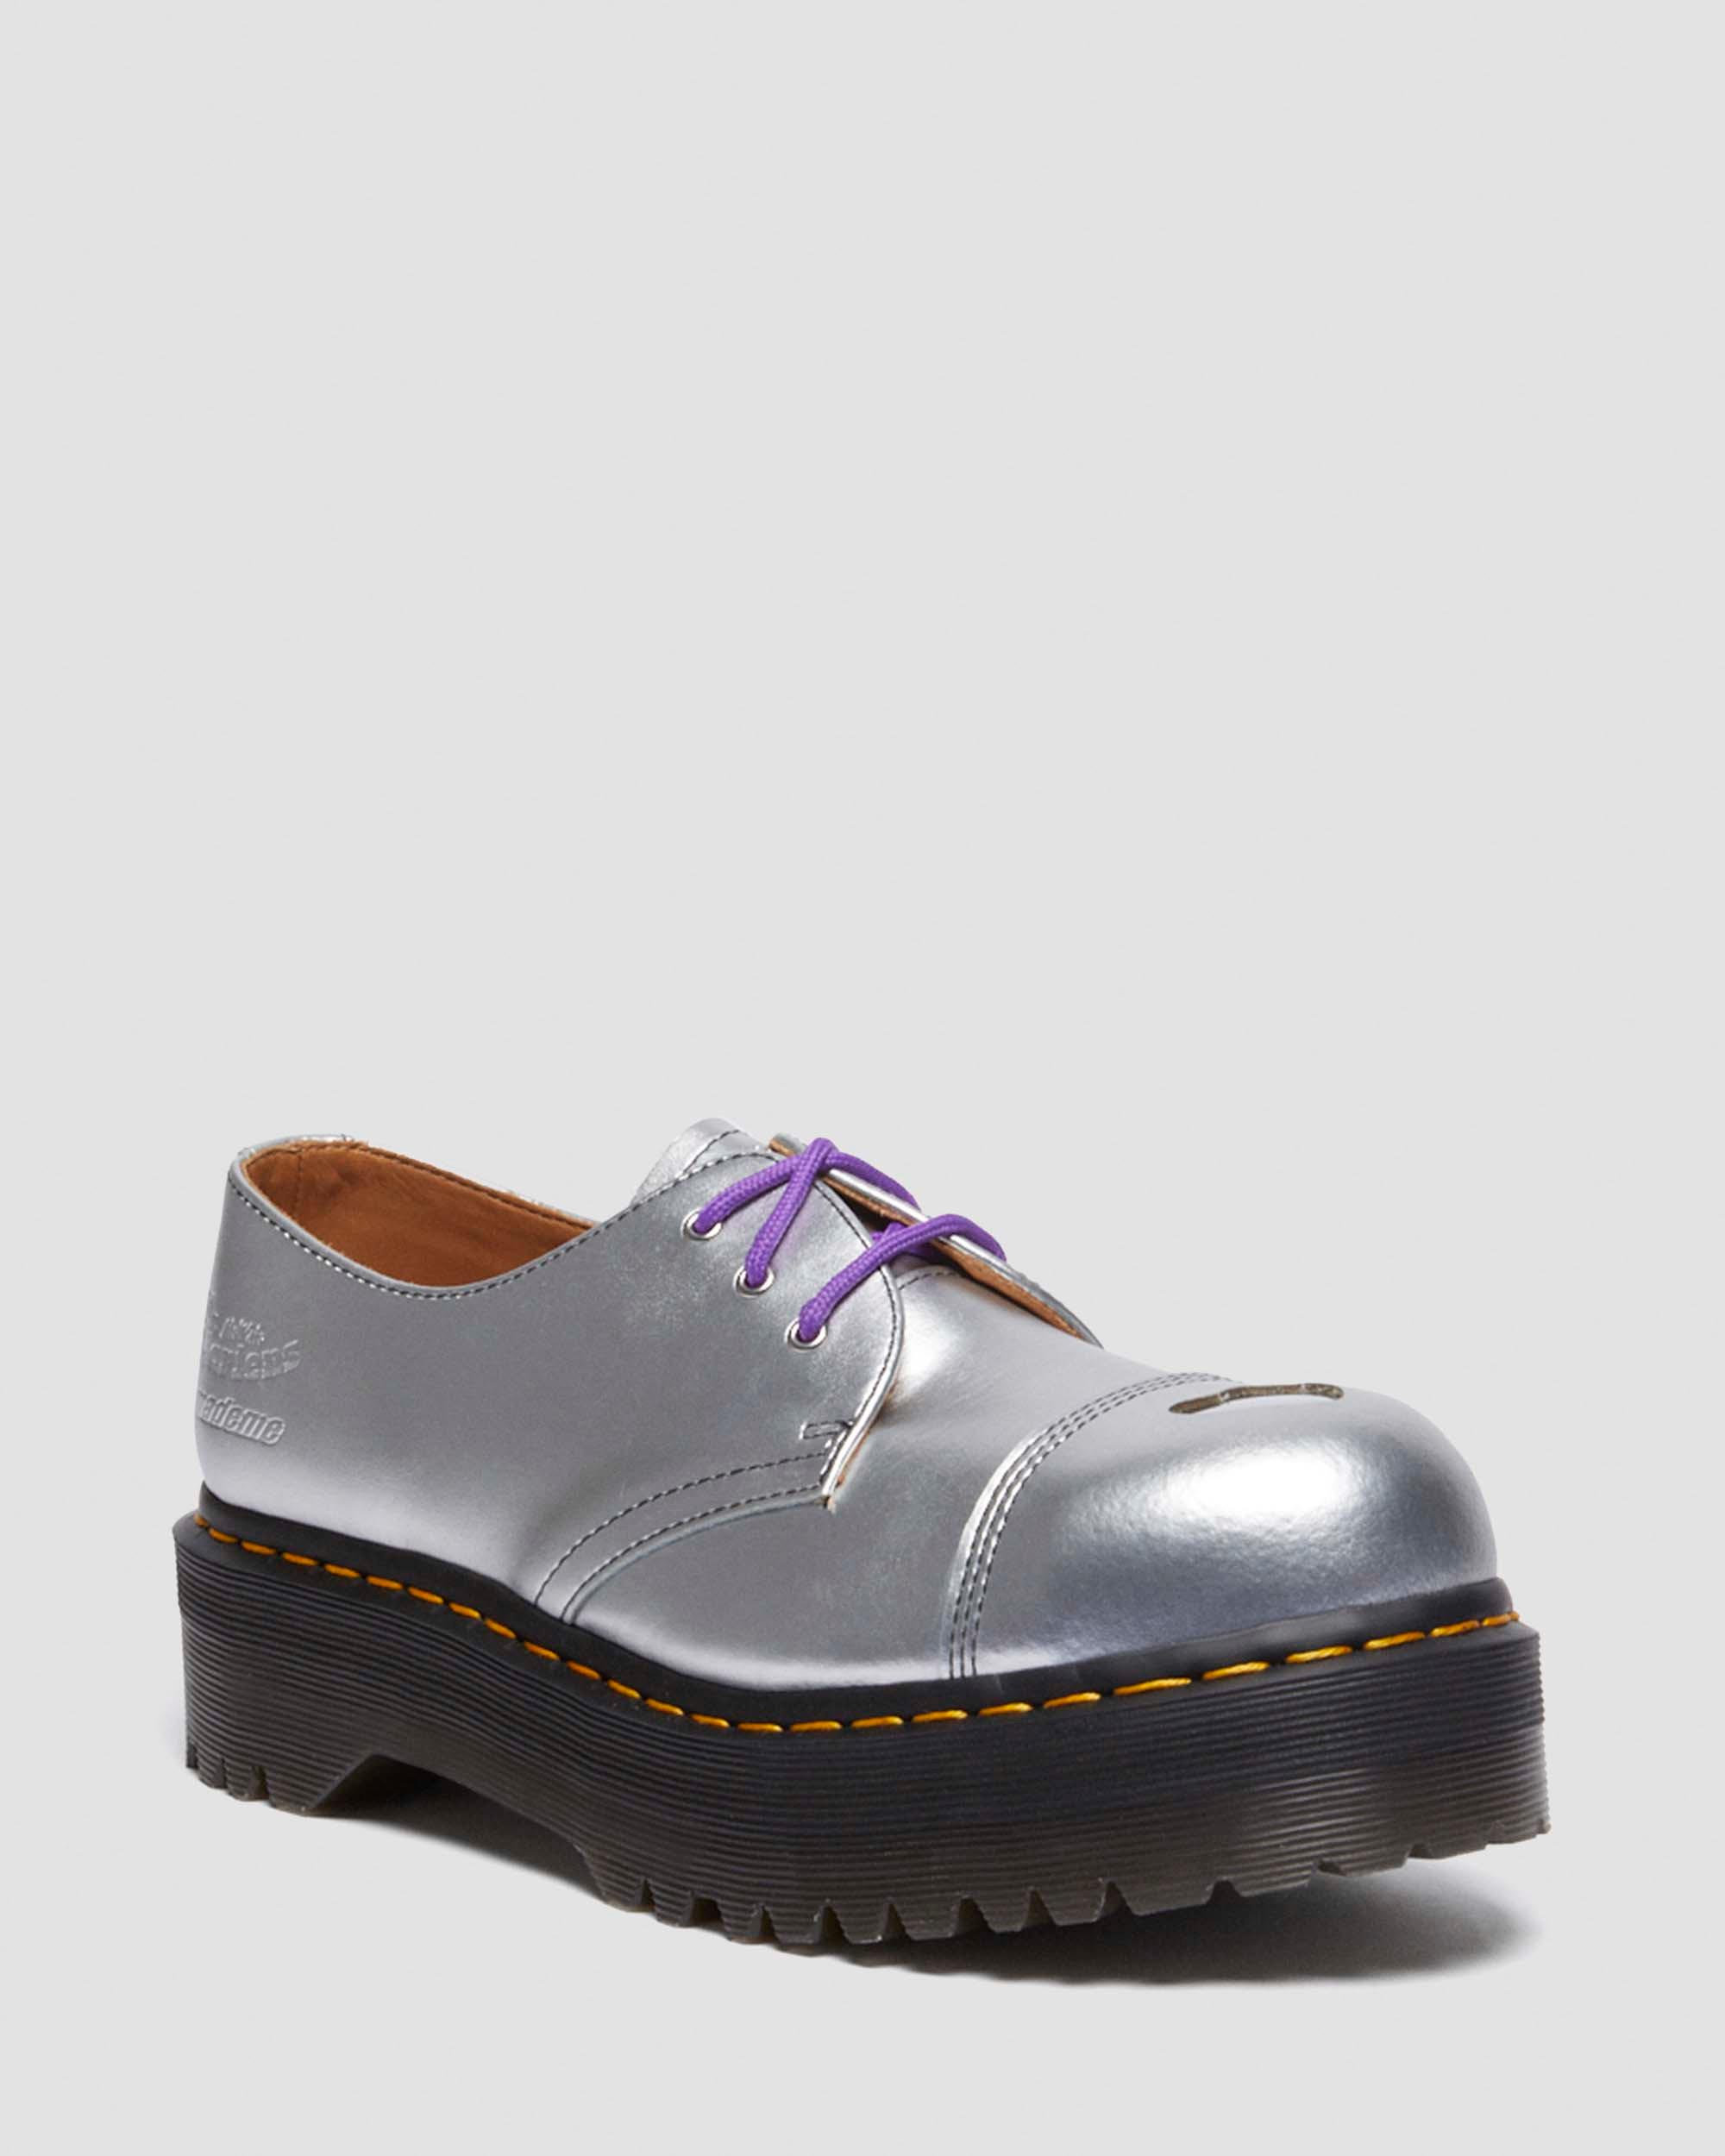 1461 QUAD MADEME ALUMIX LEATHER PLATFORM SHOES in Silver